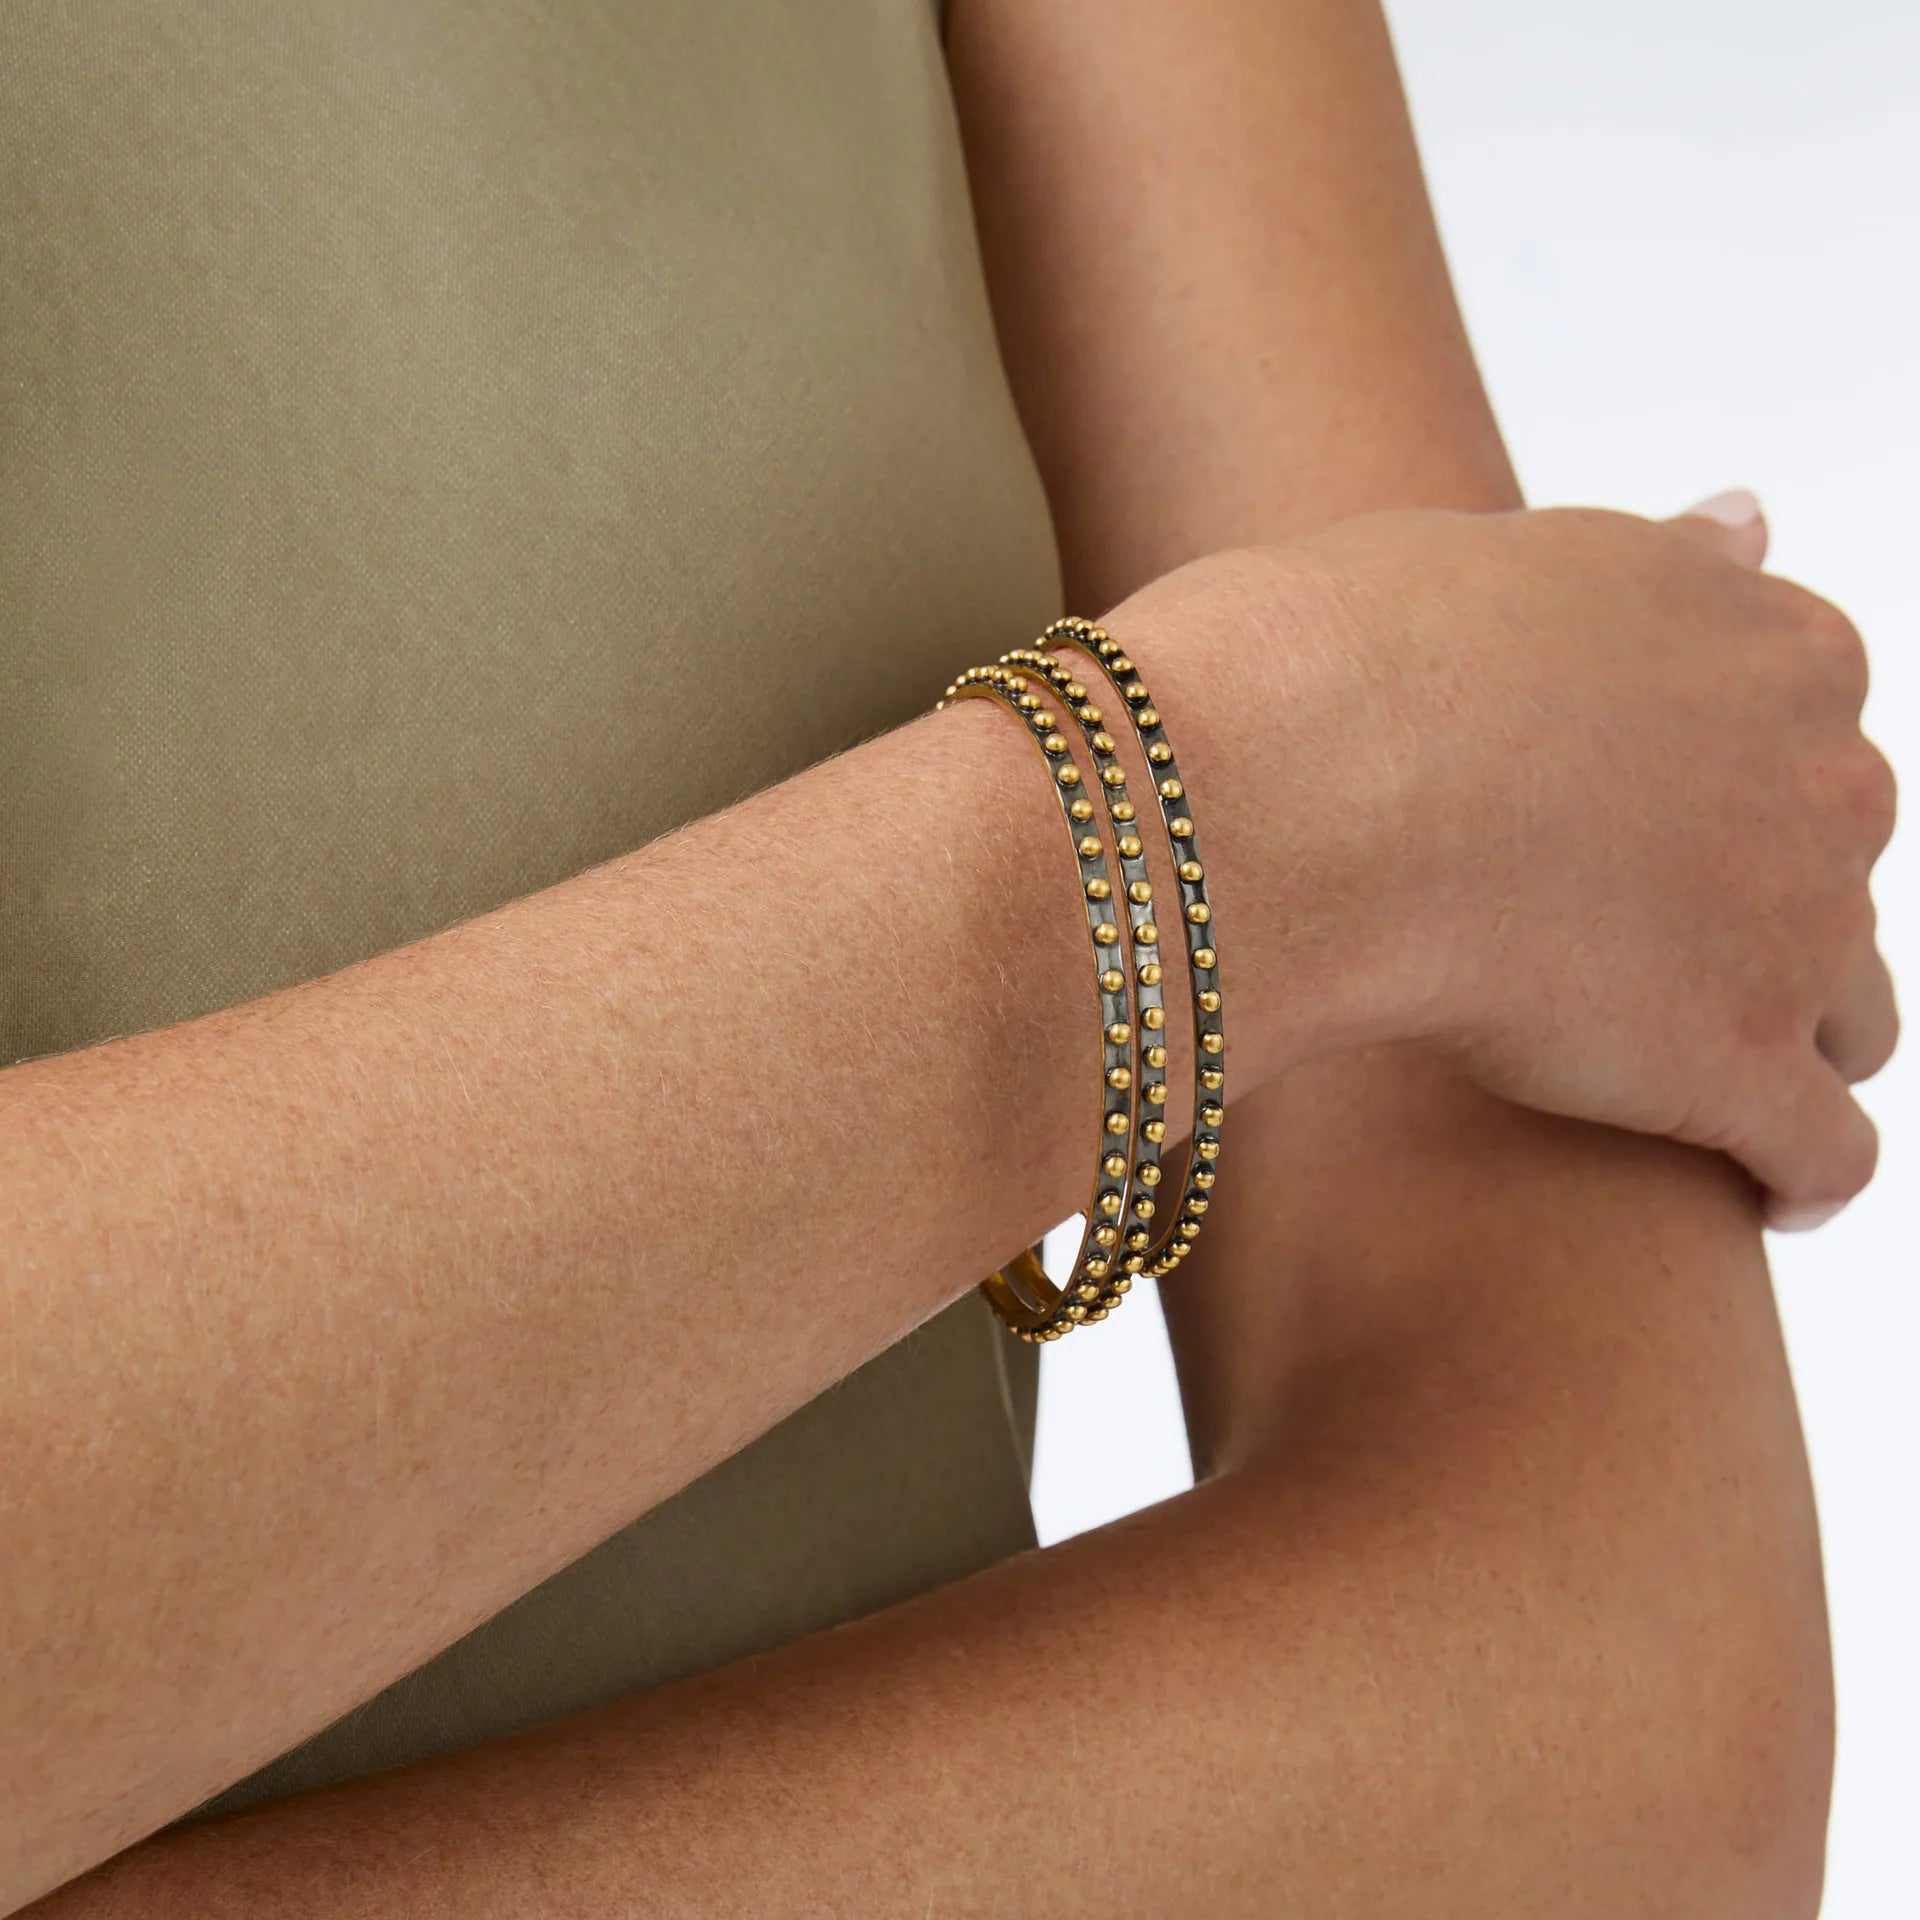 Julie Vos | SoHo Bangle in Mixed Metal - Giddy Up Glamour Boutique